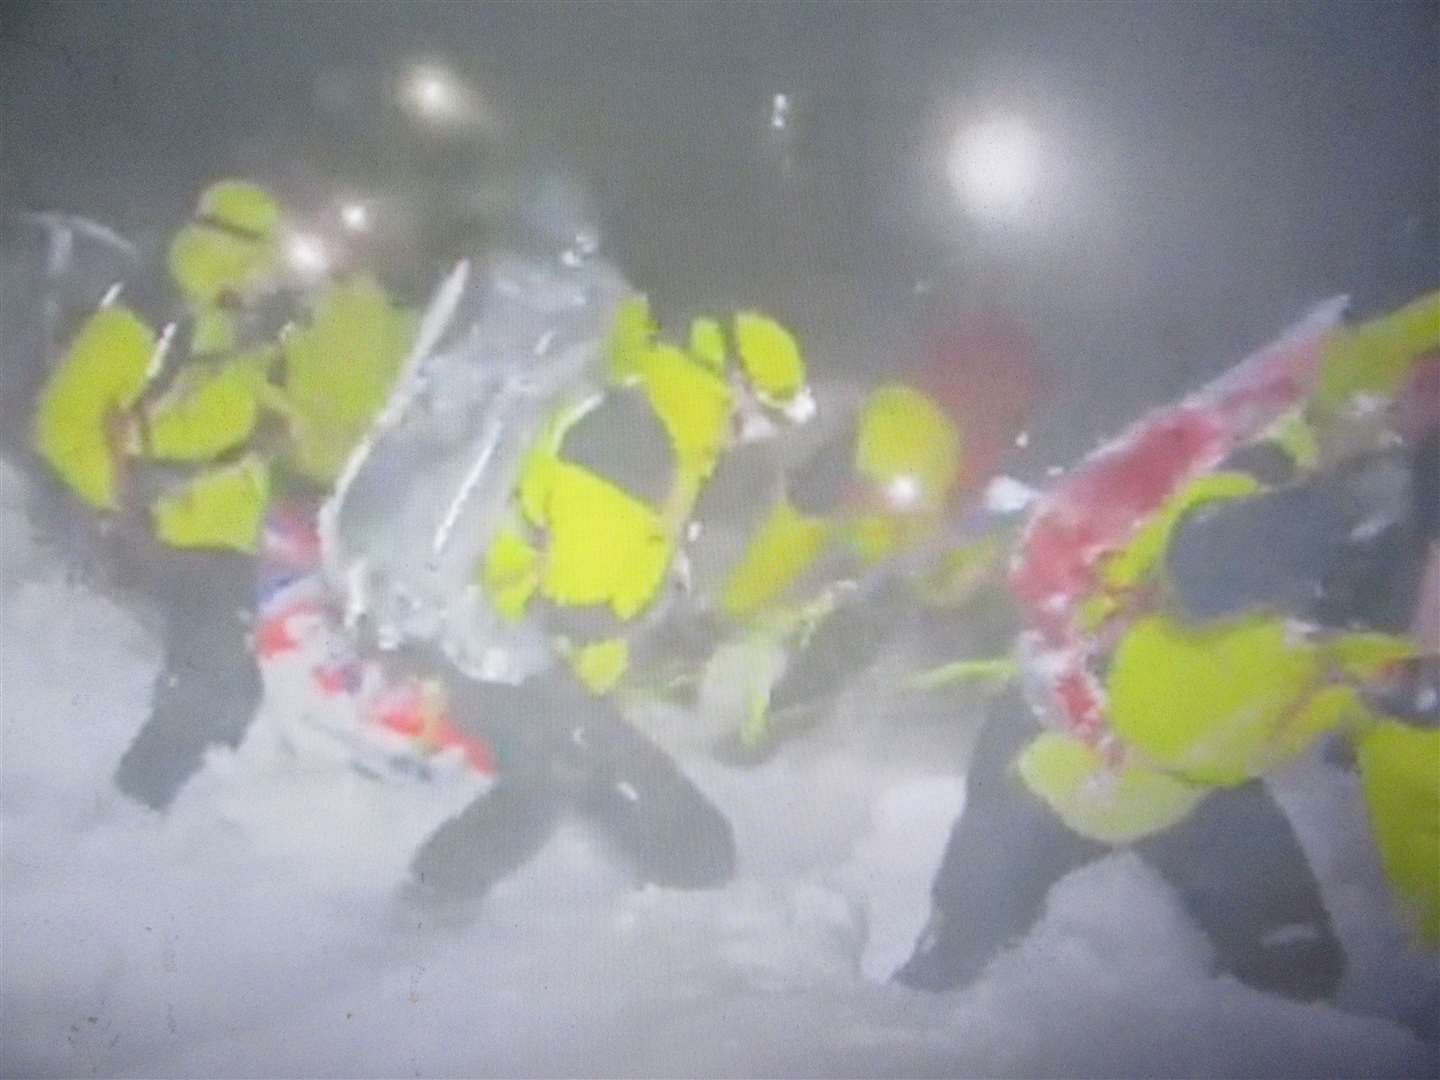 Gale force winds and blizzards fought the rescue team (Pictures courtesy of CMRT)